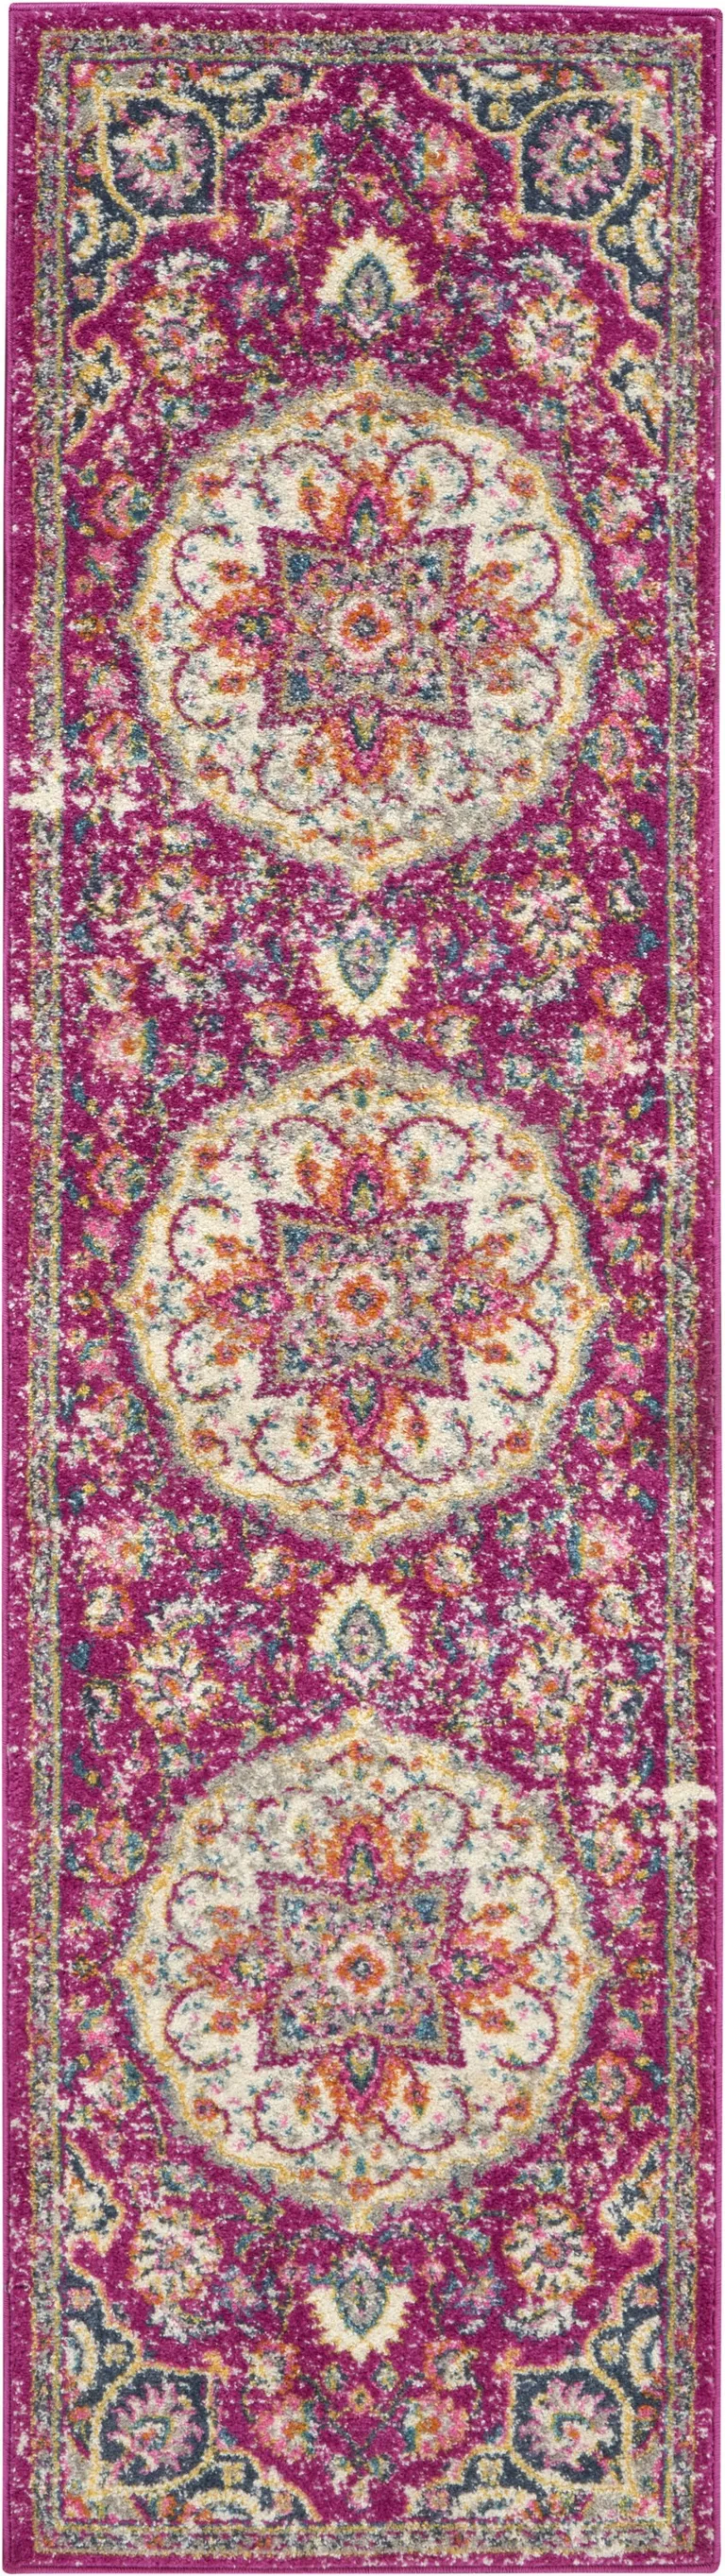 Pink and Ivory Medallion Runner Rug Photo 1